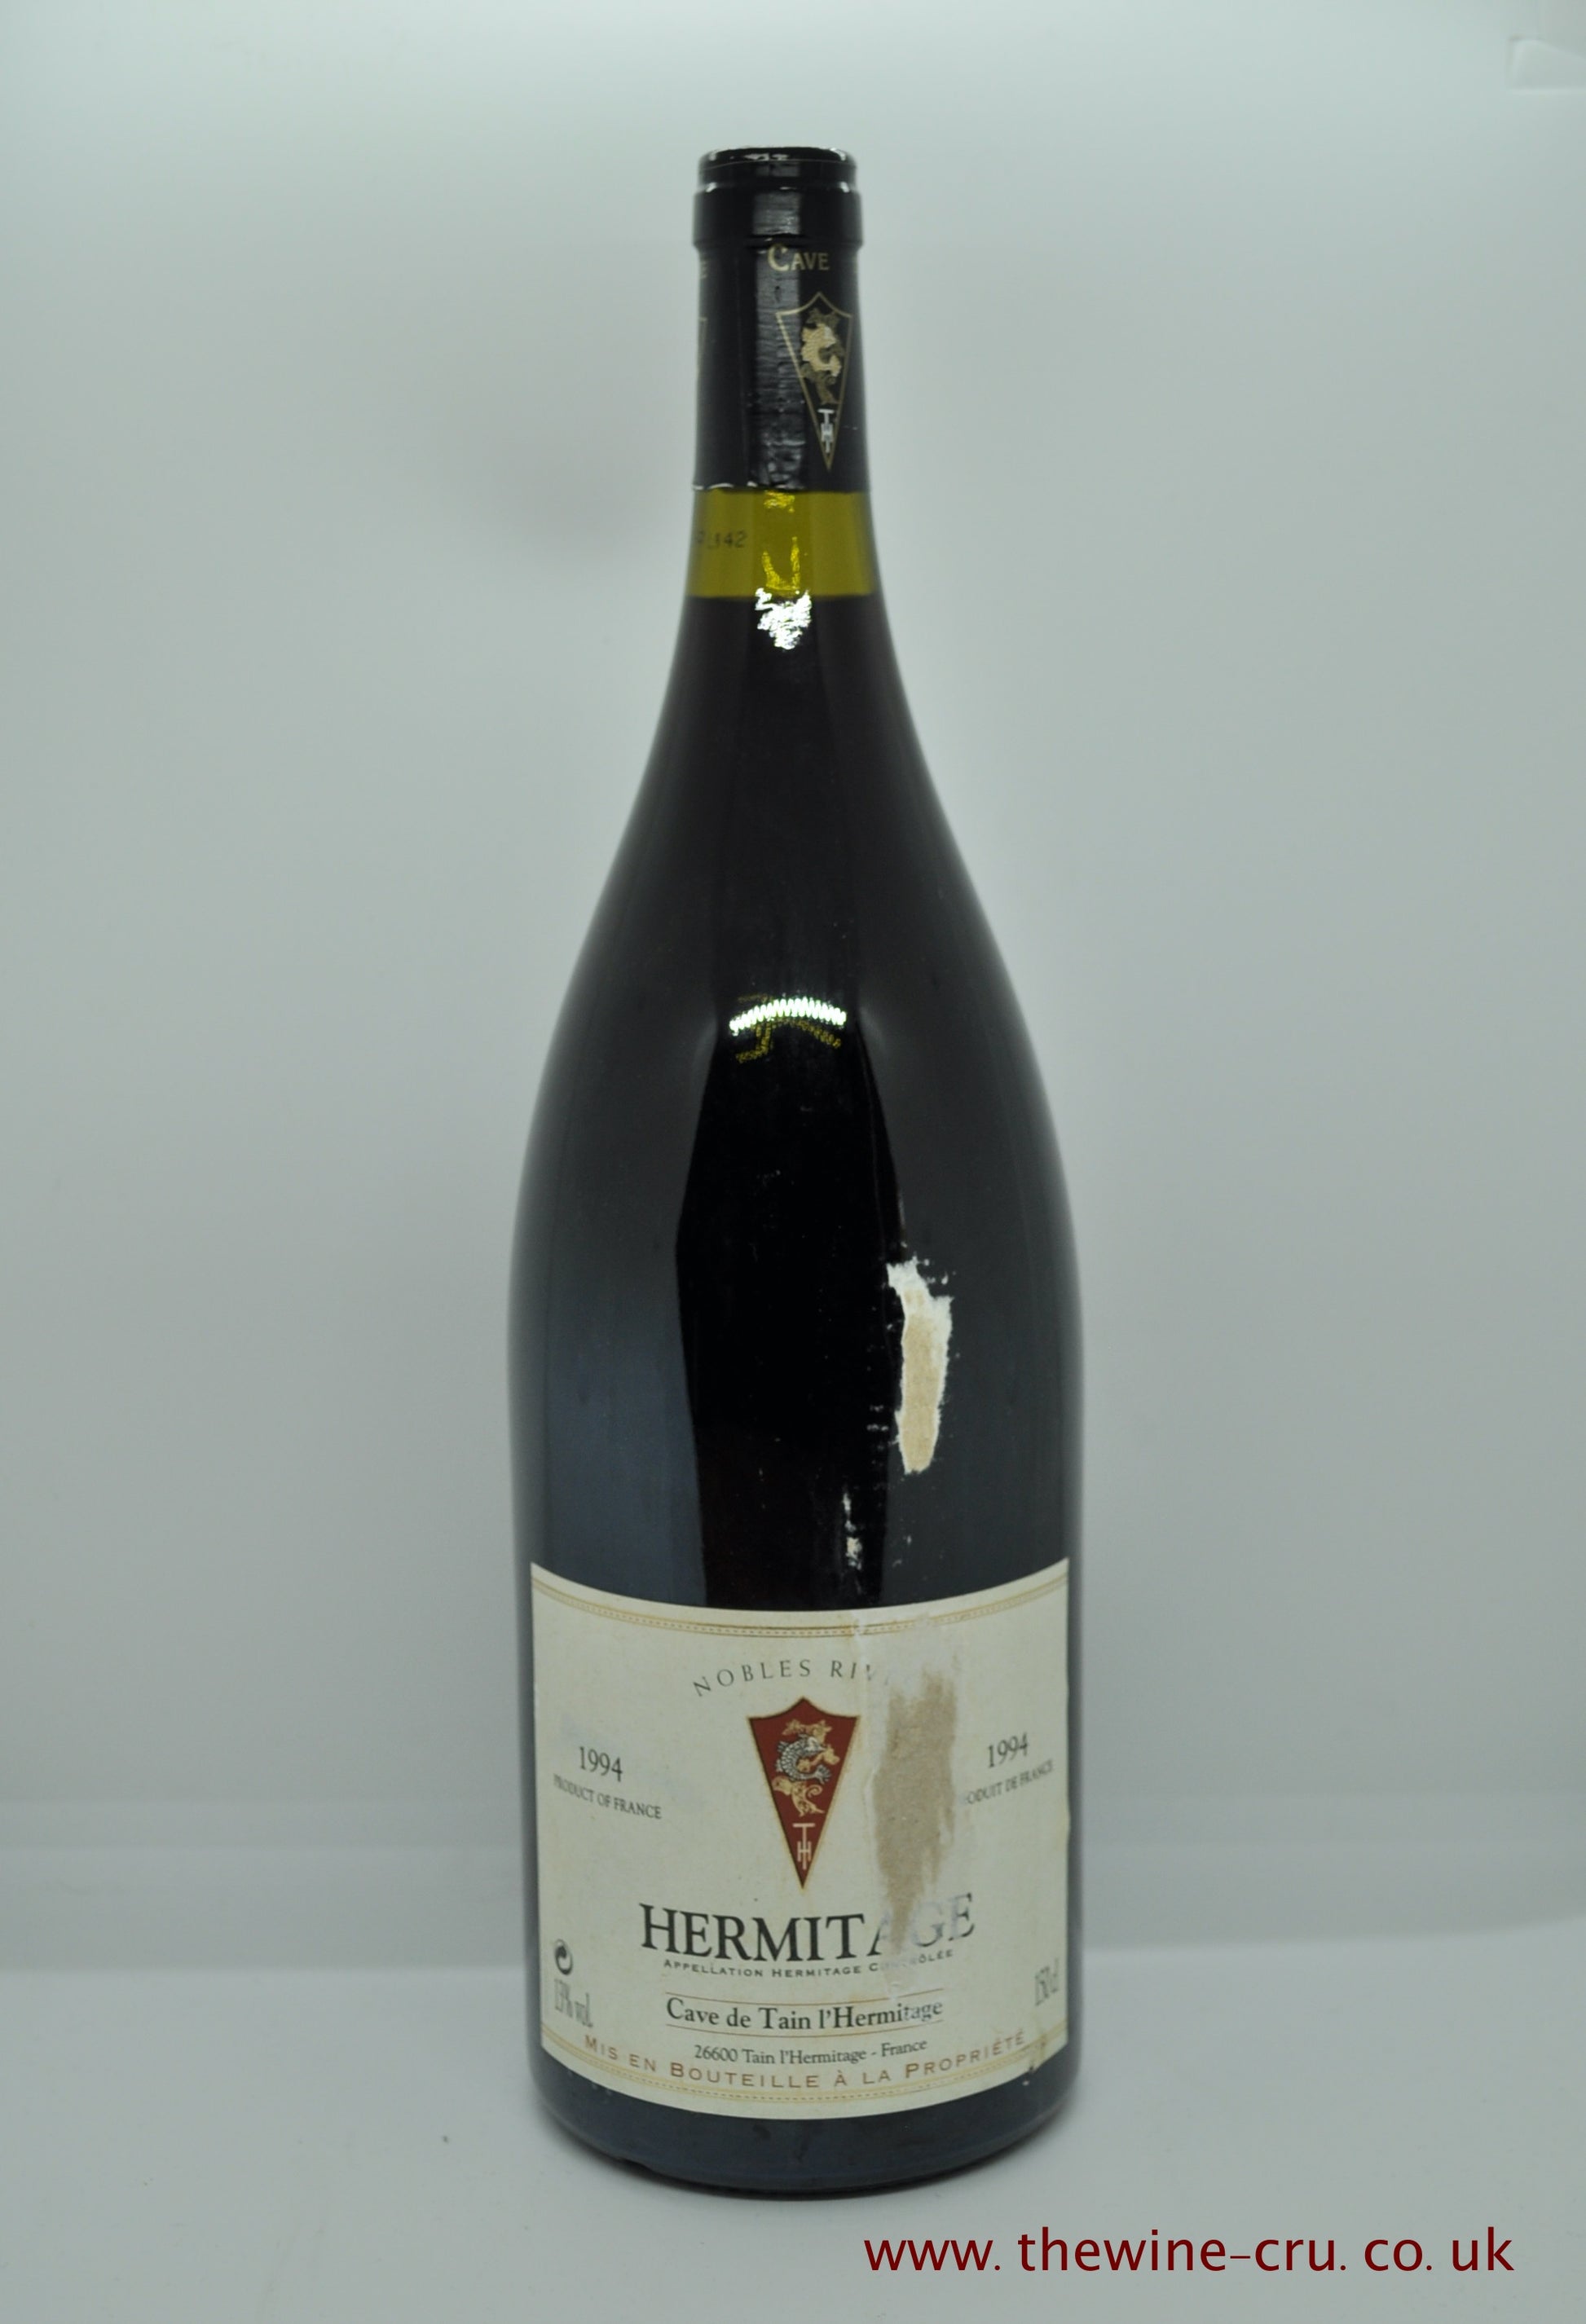 1994 vintage red wine. Hermitage Nobles Rives Cave De Tain Magnum 1994. France, Rhone. Immediate delivery. Free local delivery. Gift wrapping available.